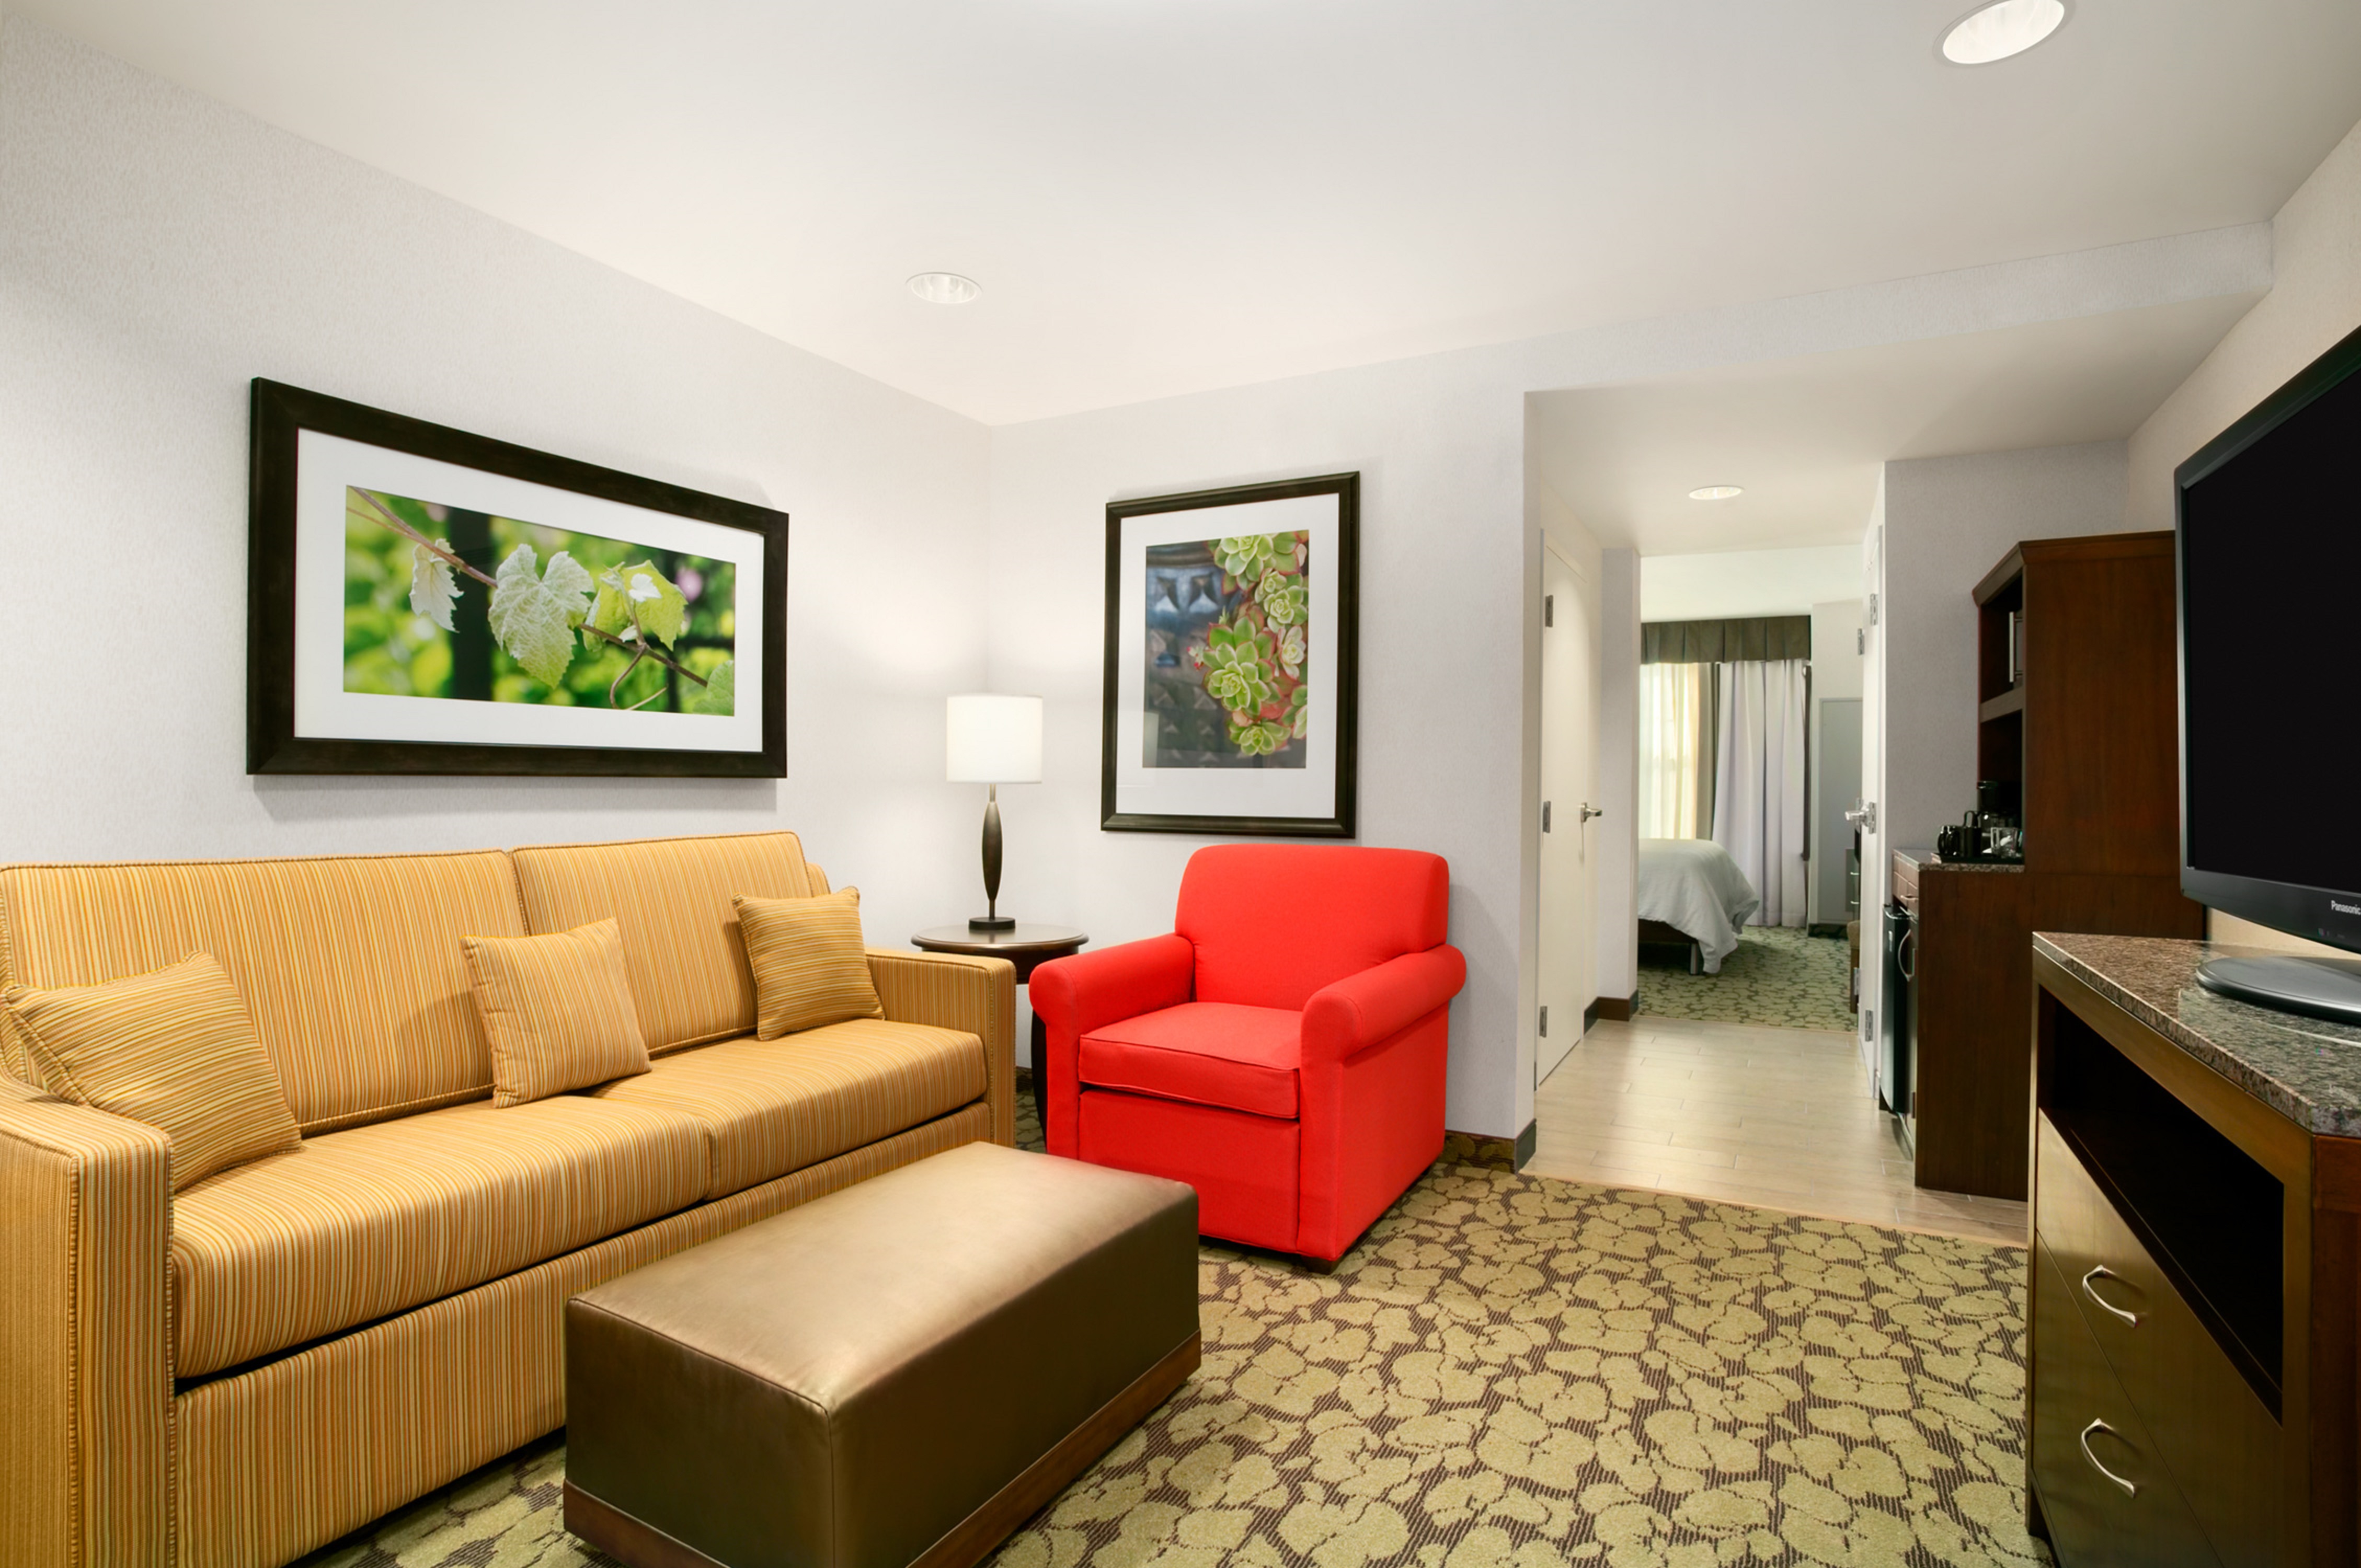 Guest Suite Lounge Area with Sofa, Armchair, Footrest, HDTV and Beverage Station